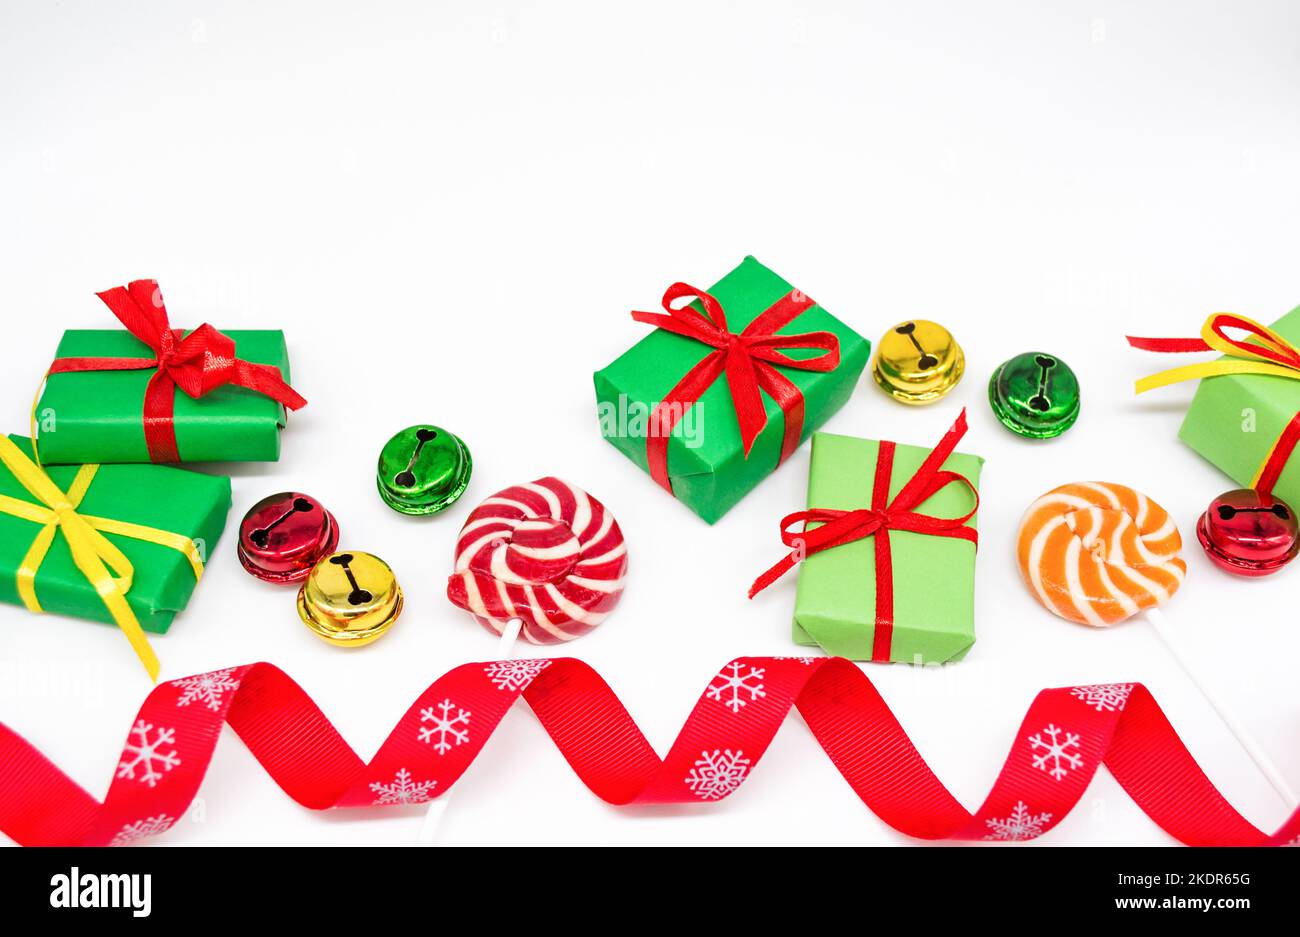 Happy holidays: gifts with lollipops and red, green, golden bells. Red ribbon on white background, copy space. The concept of Christmas, sales. Stock Photo